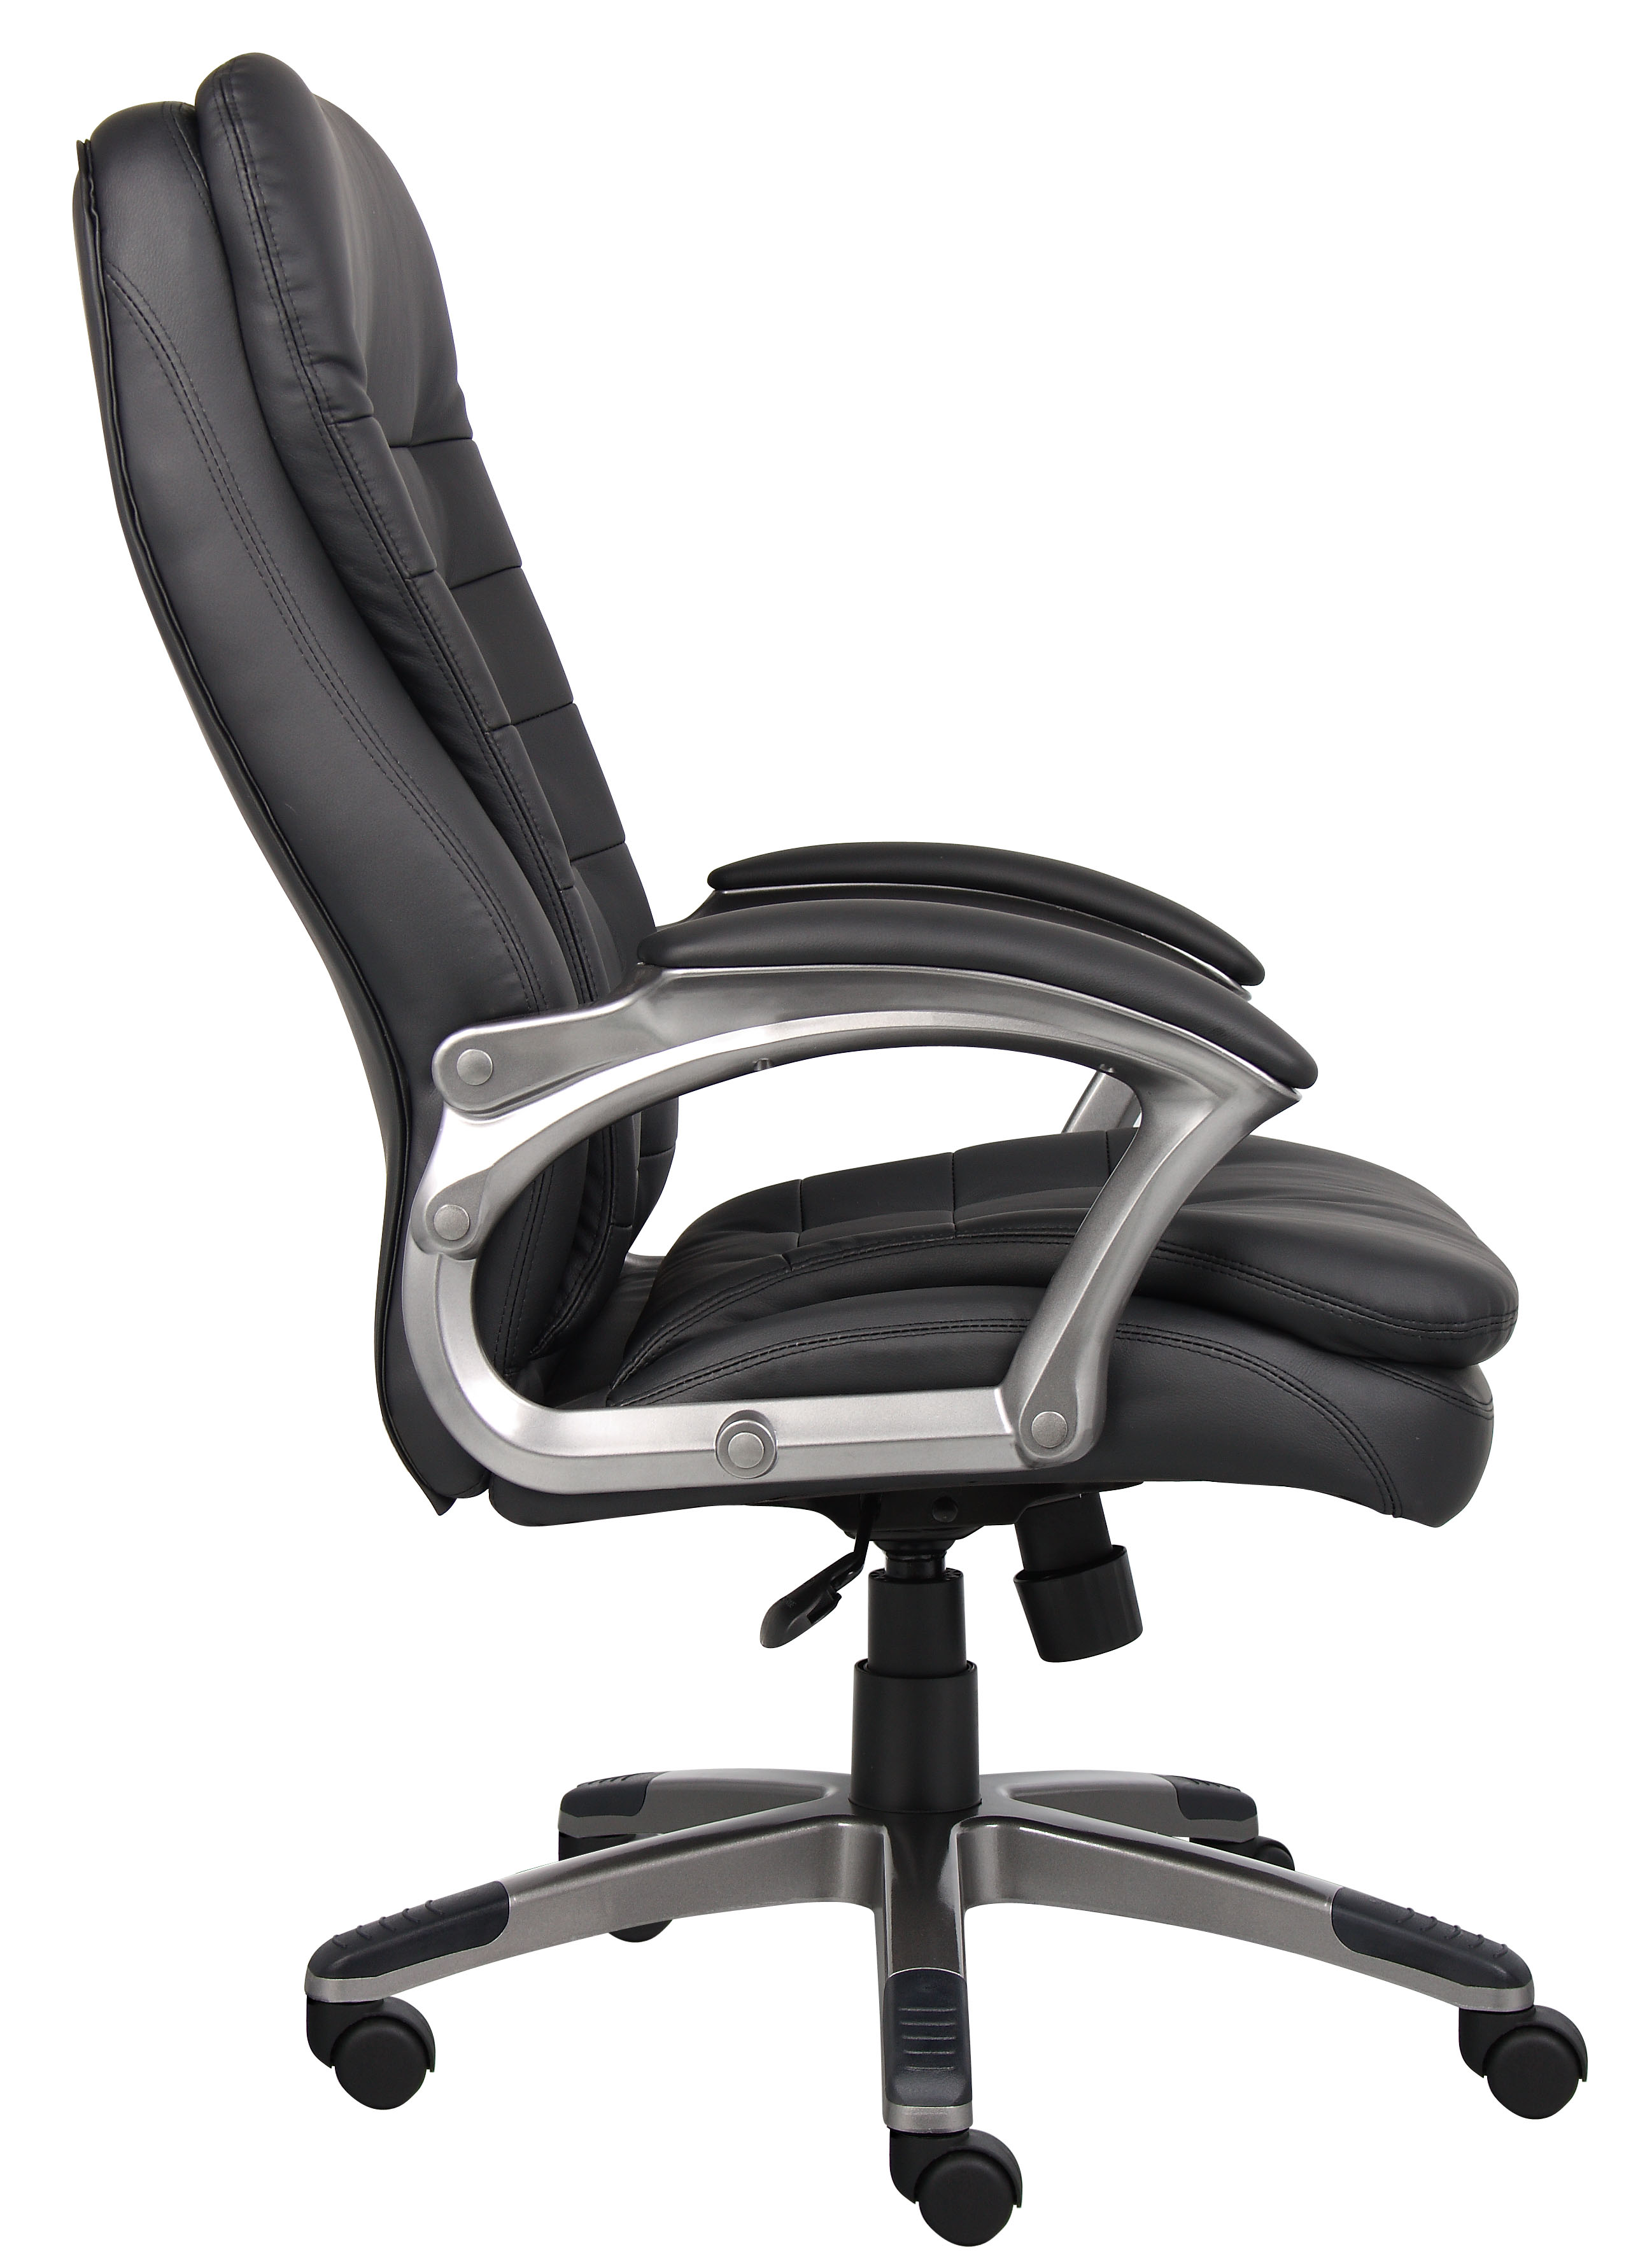 Boss Office Products Executive High Back Pillow Top Office Chair in Black - image 4 of 9